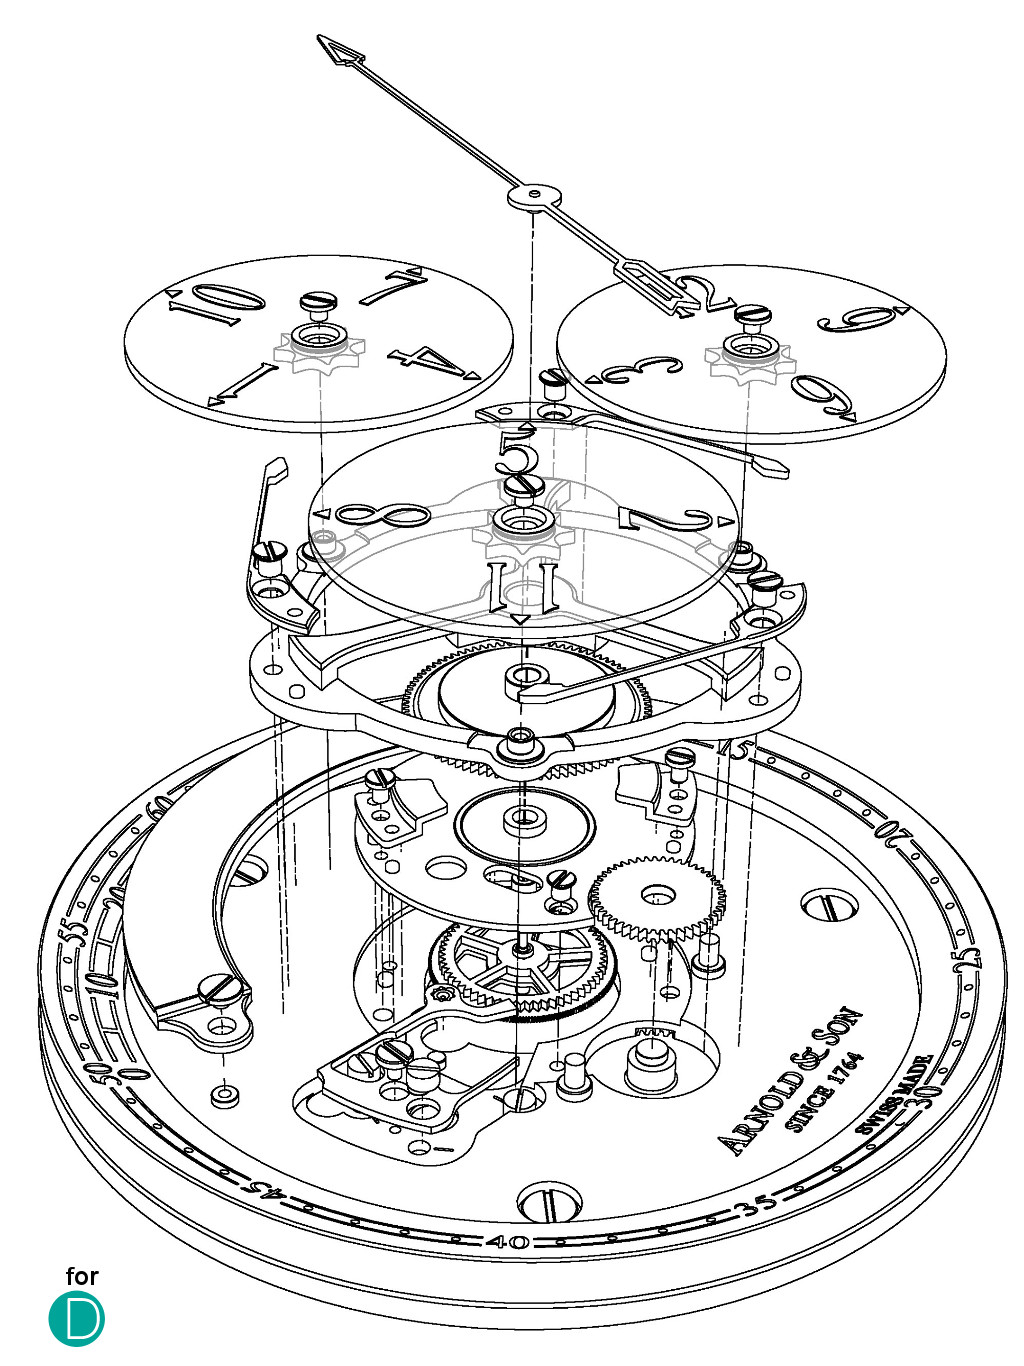 An exploded view of the movement featured in the Golden Wheel. 